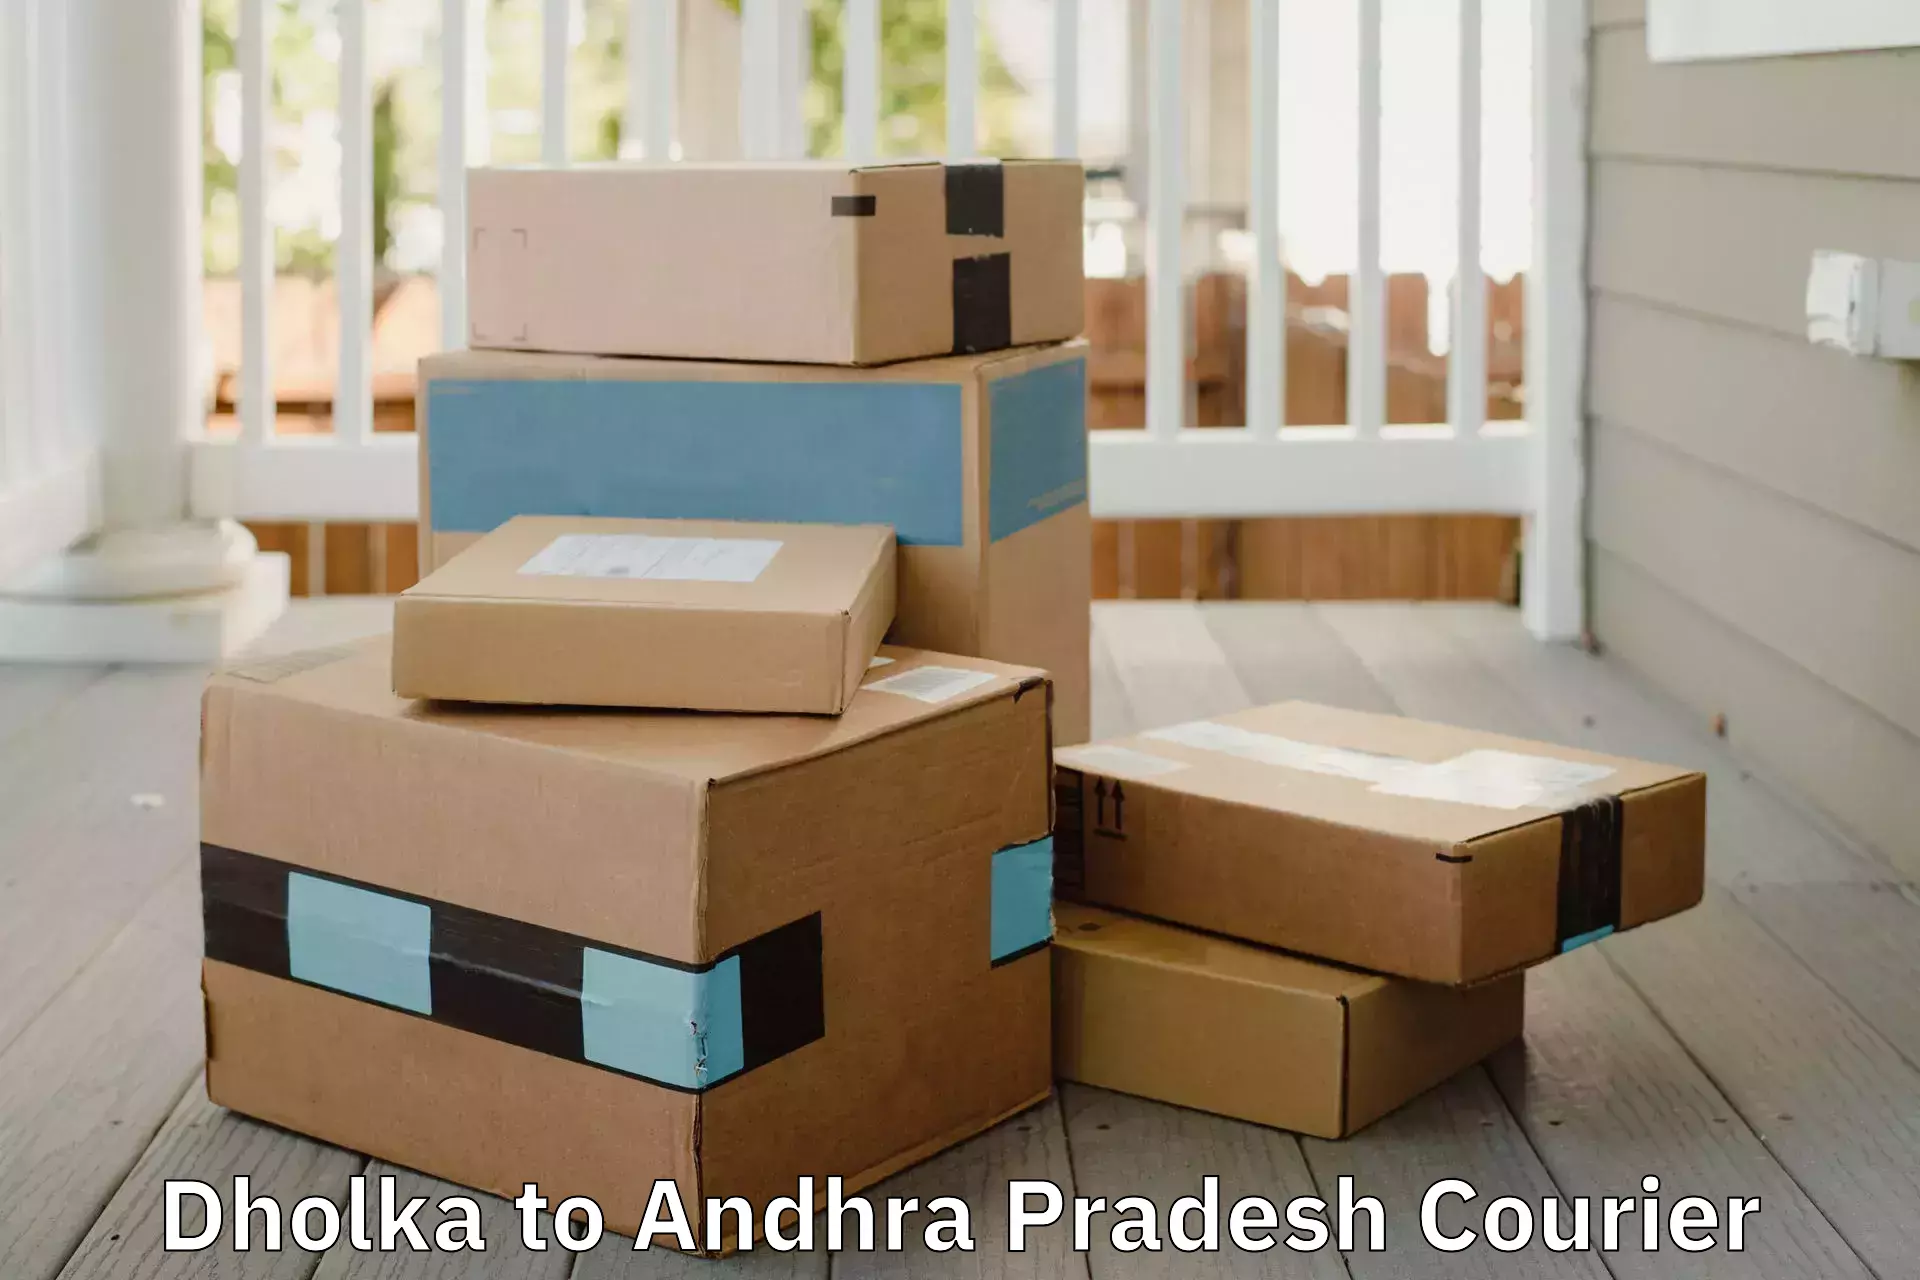 Full-service relocation in Dholka to Addateegala